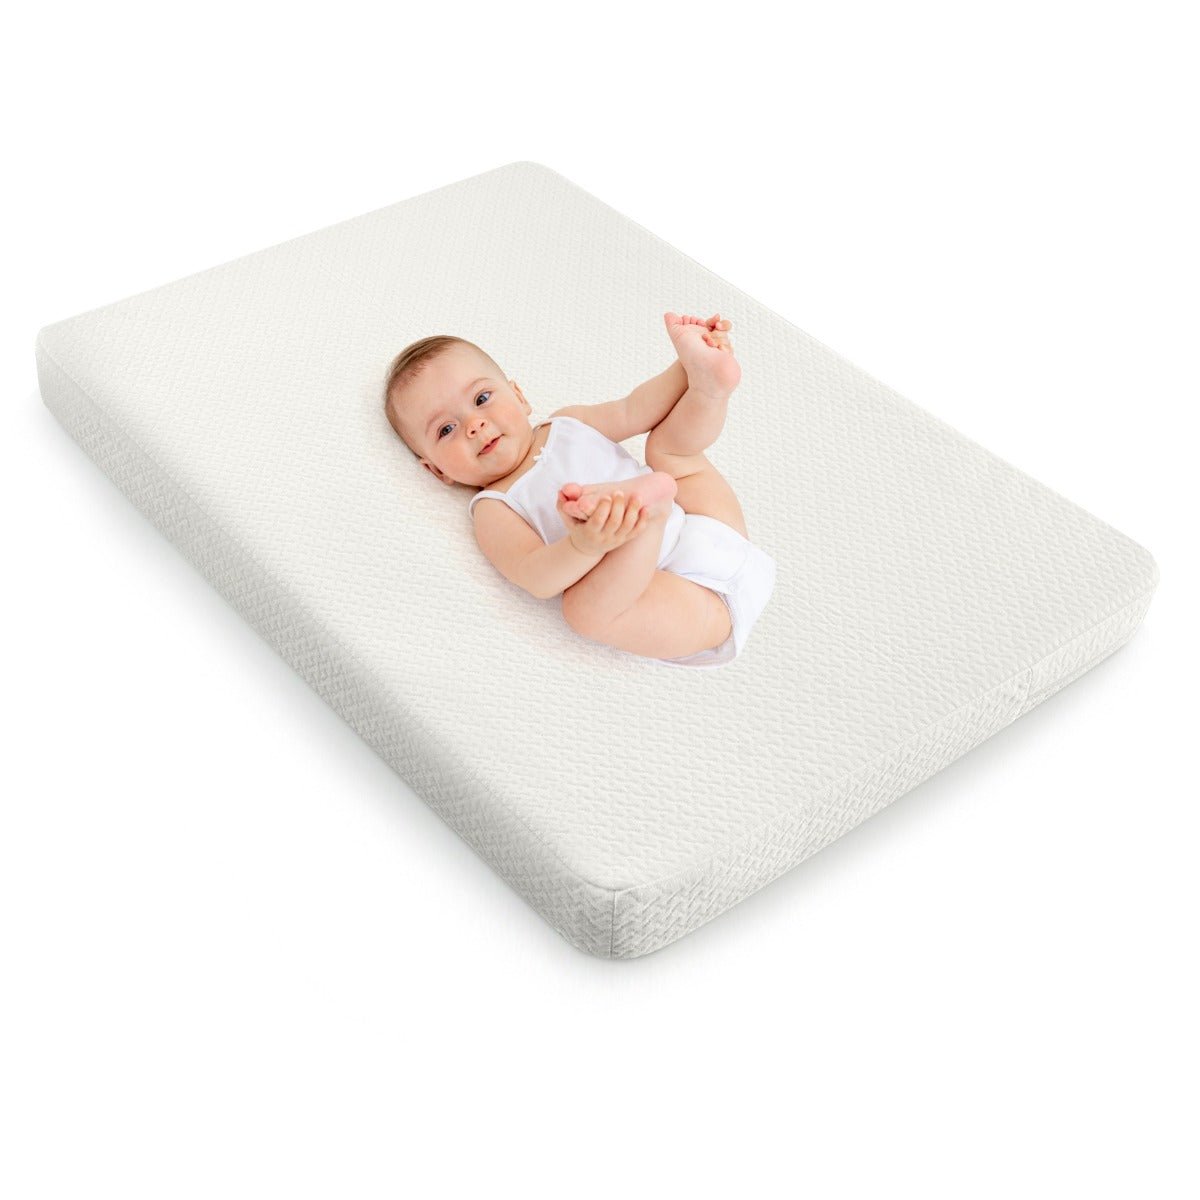 Baby Bed Mattress Playard Pad with Removable Cover